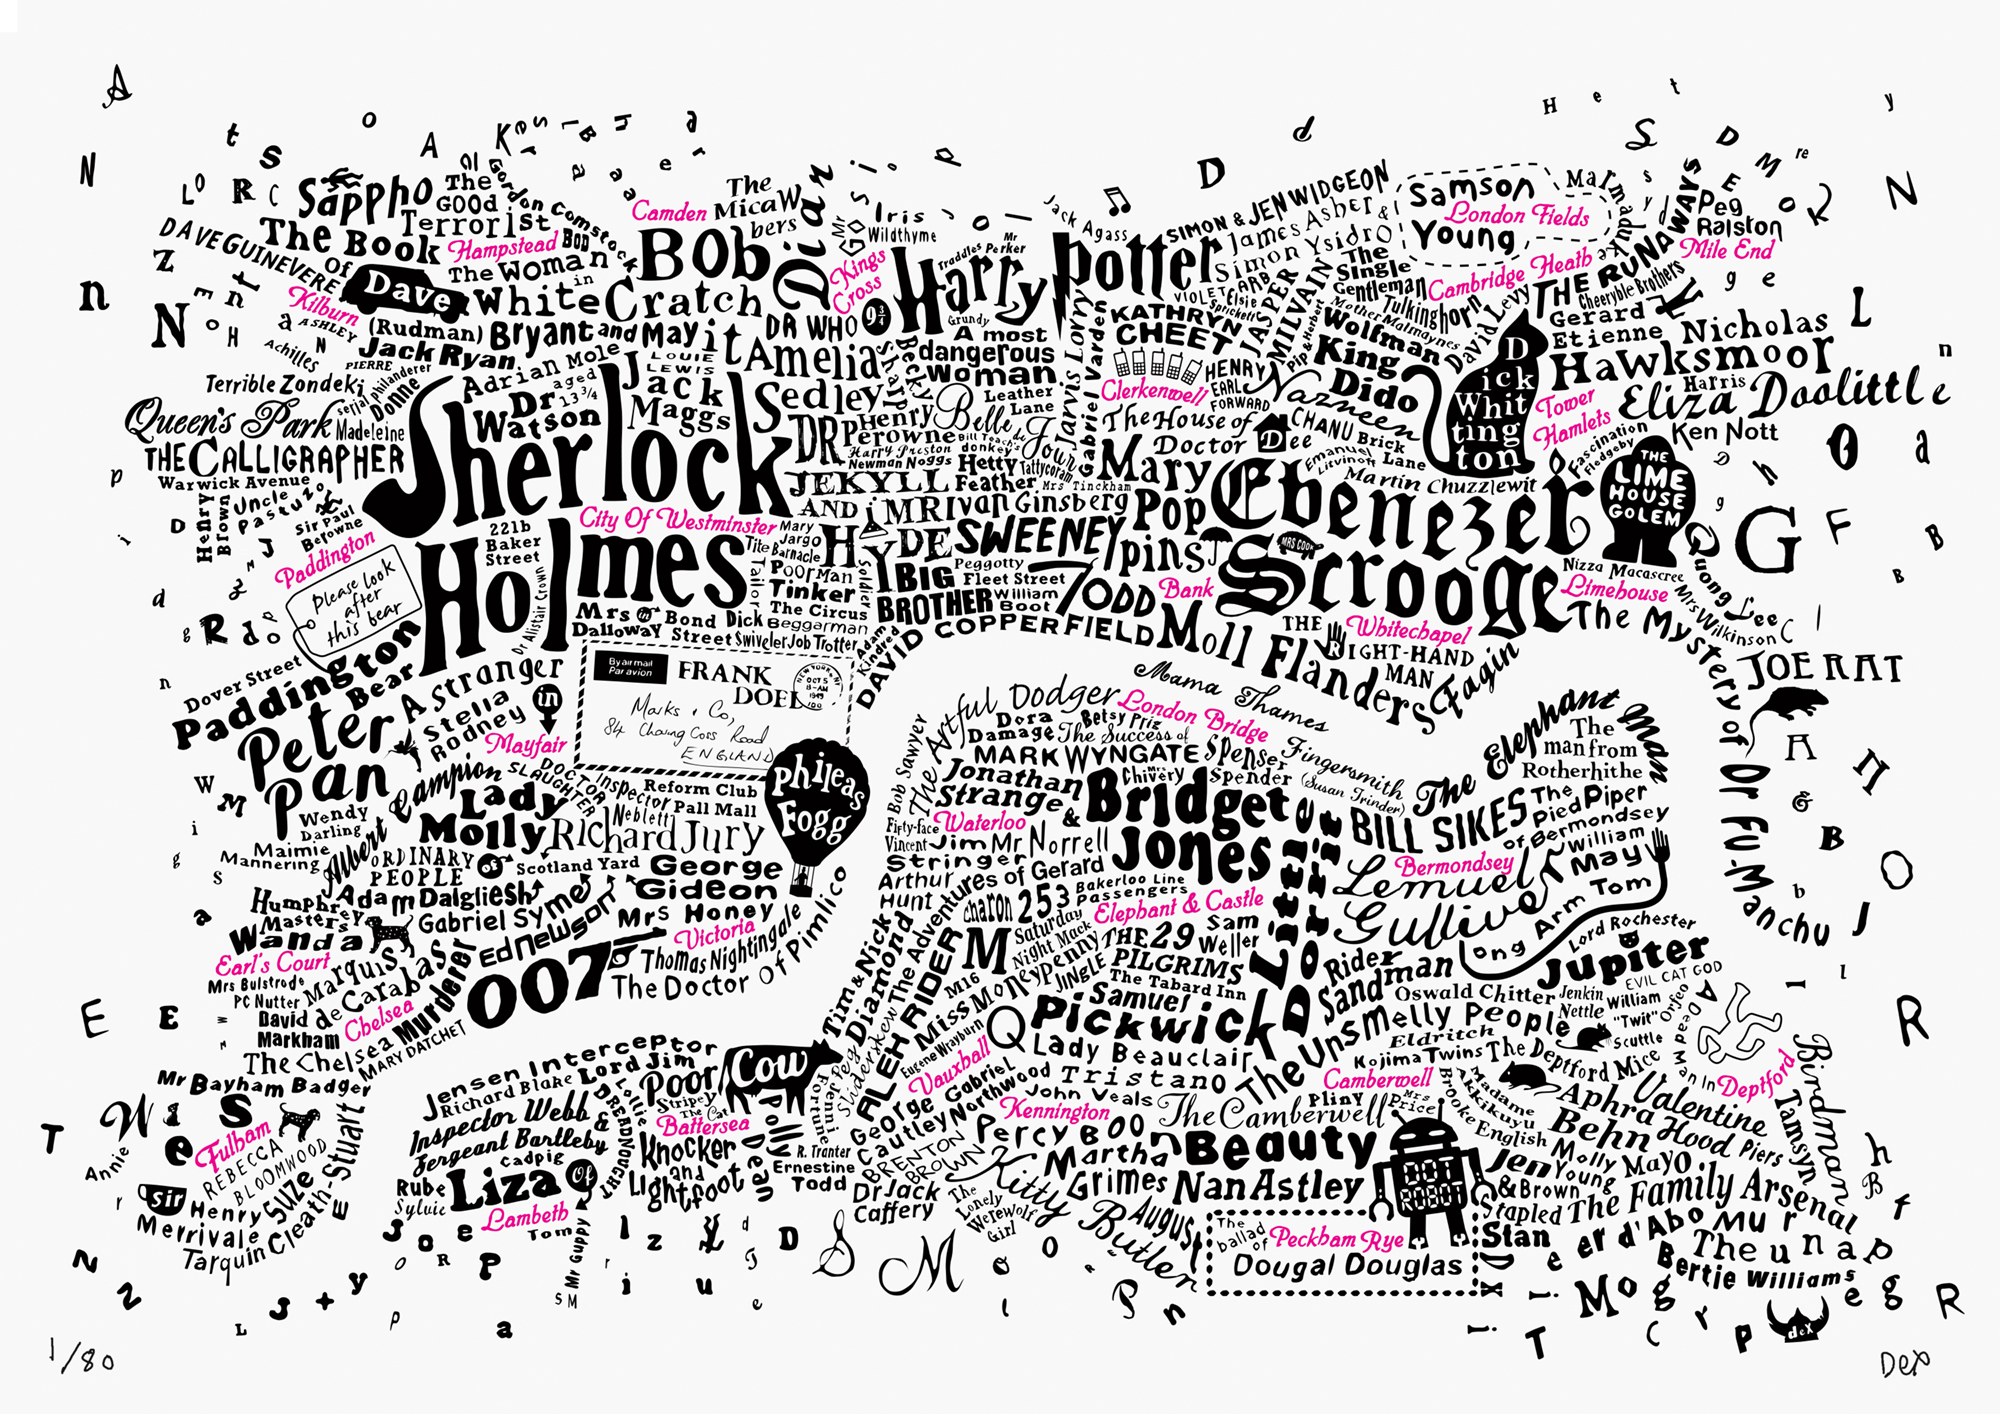 Map Of Central London featuring literature